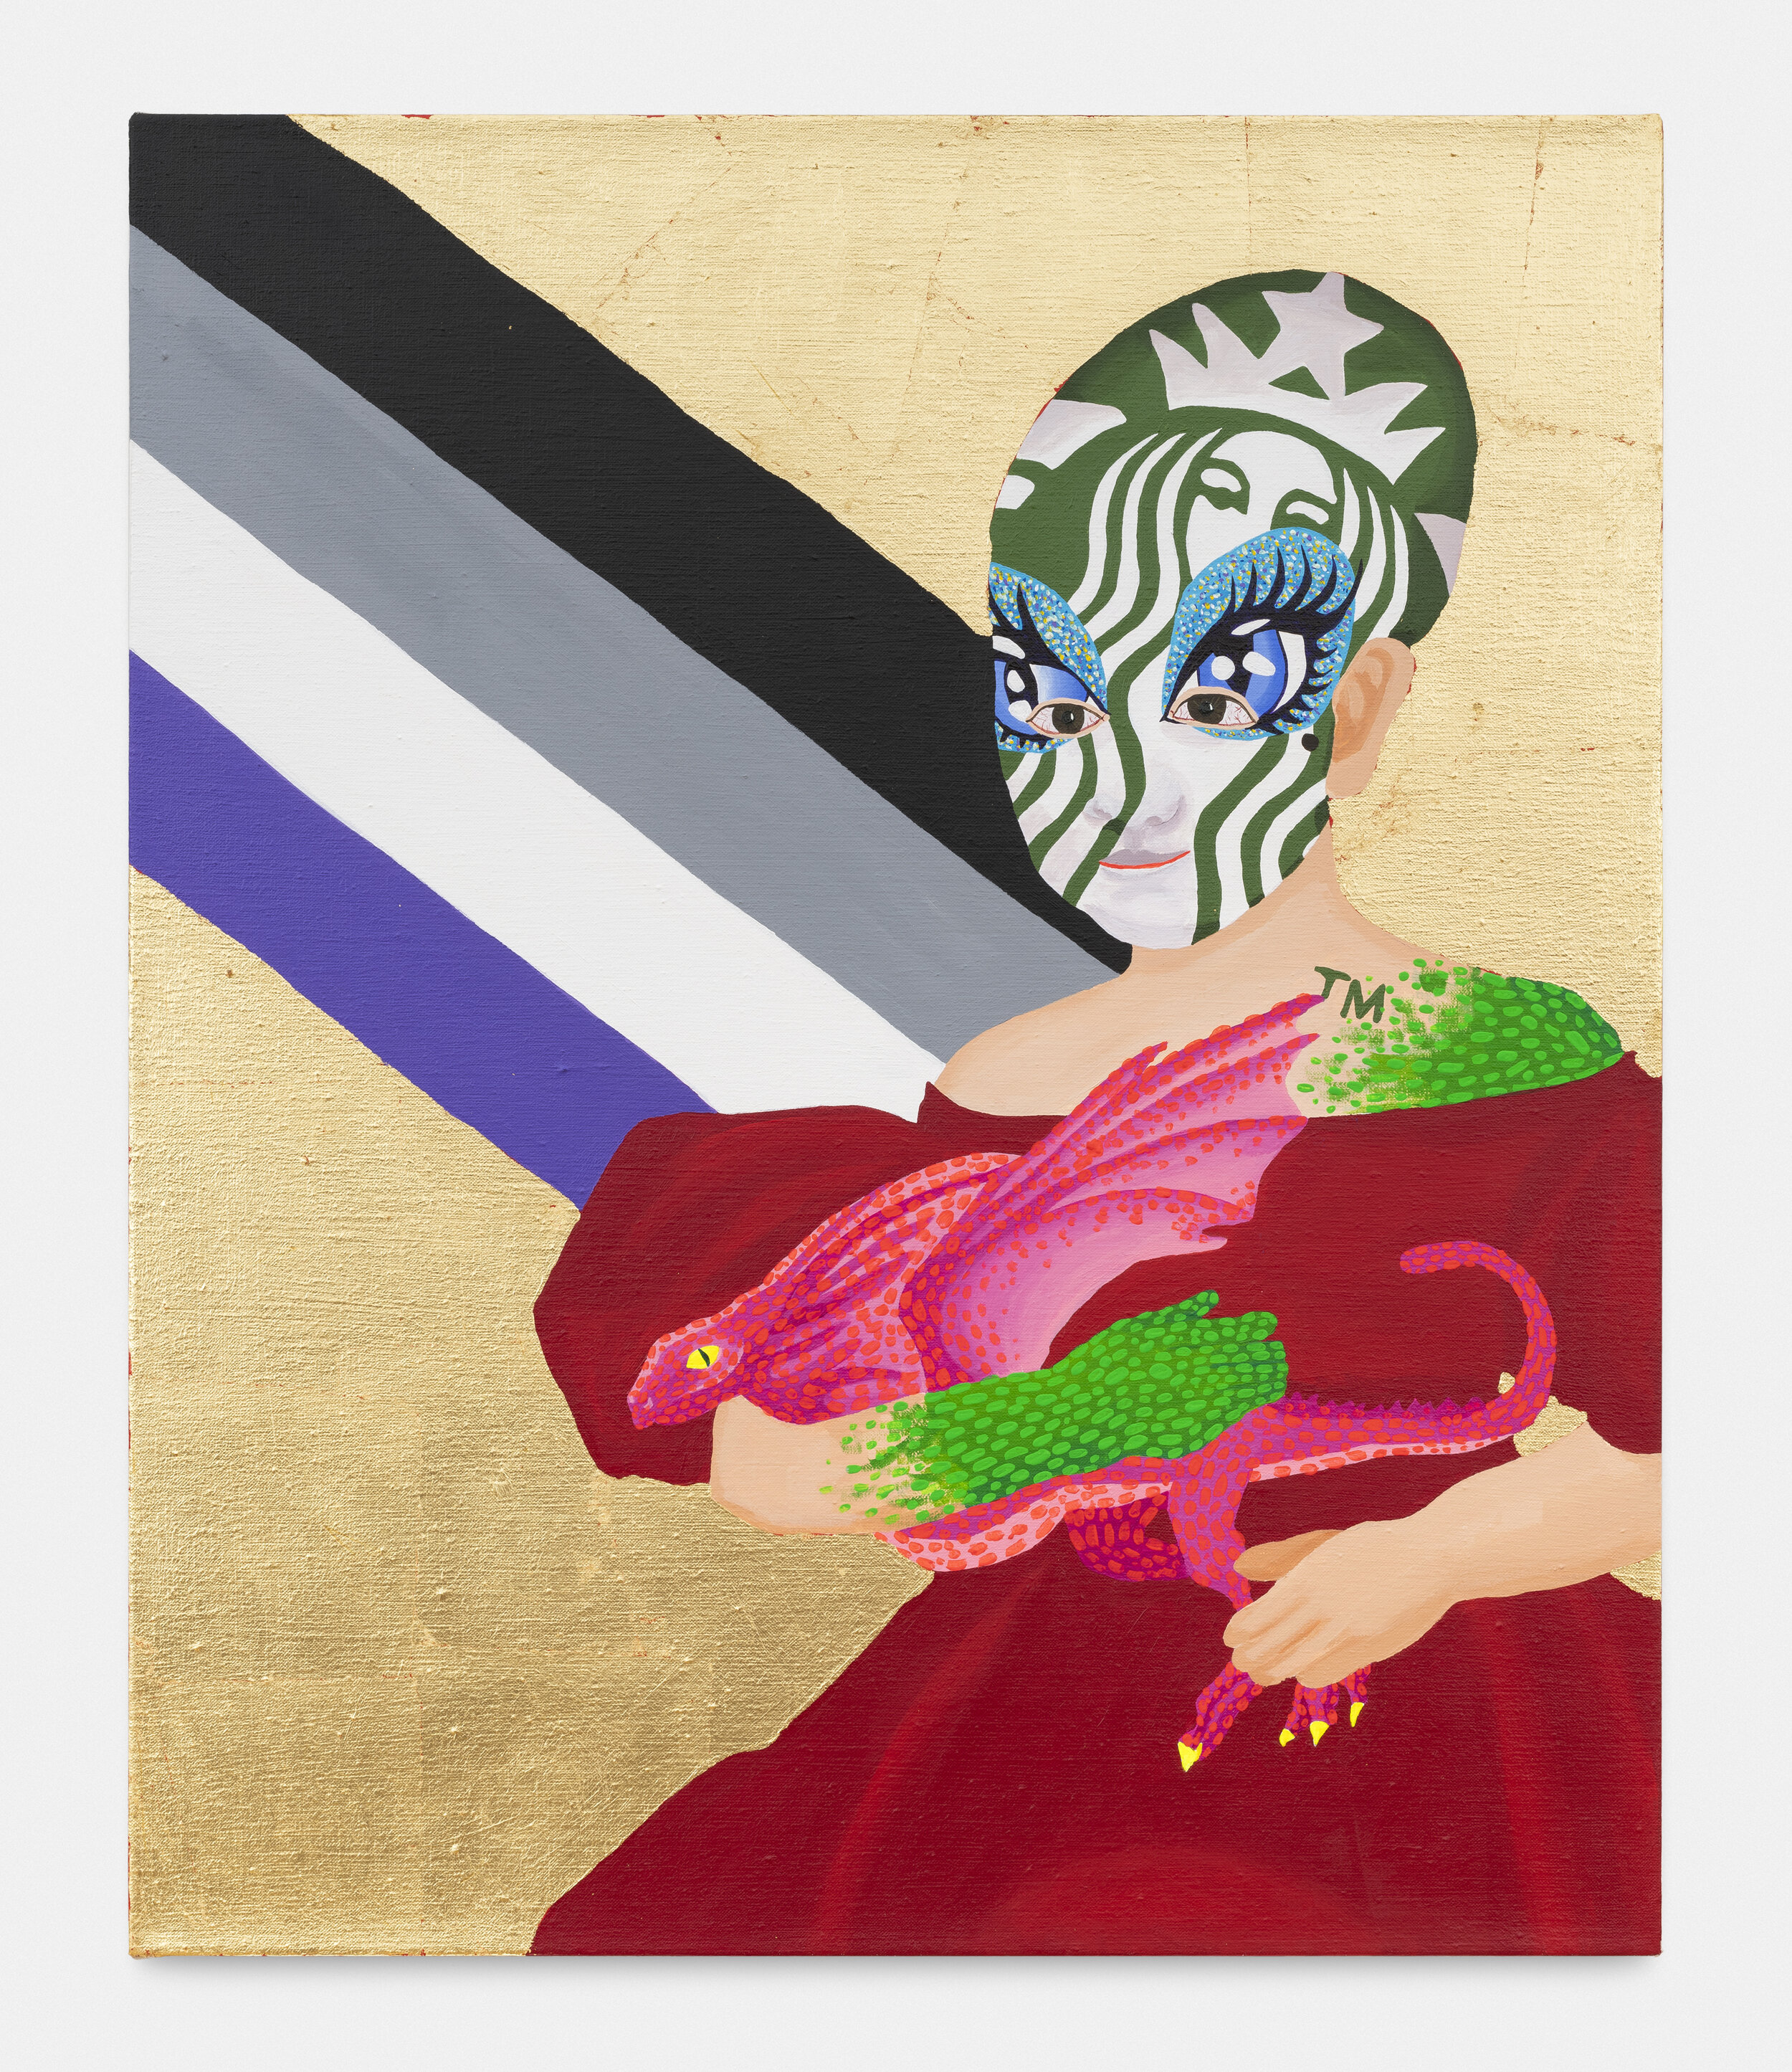   Starbucks Girl with Baby Dragon , 2019  30 x 25 x 1.5 inches (76.2 x 63.5 x 3.81 cm.)  Acrylic and gold leaf on linen 